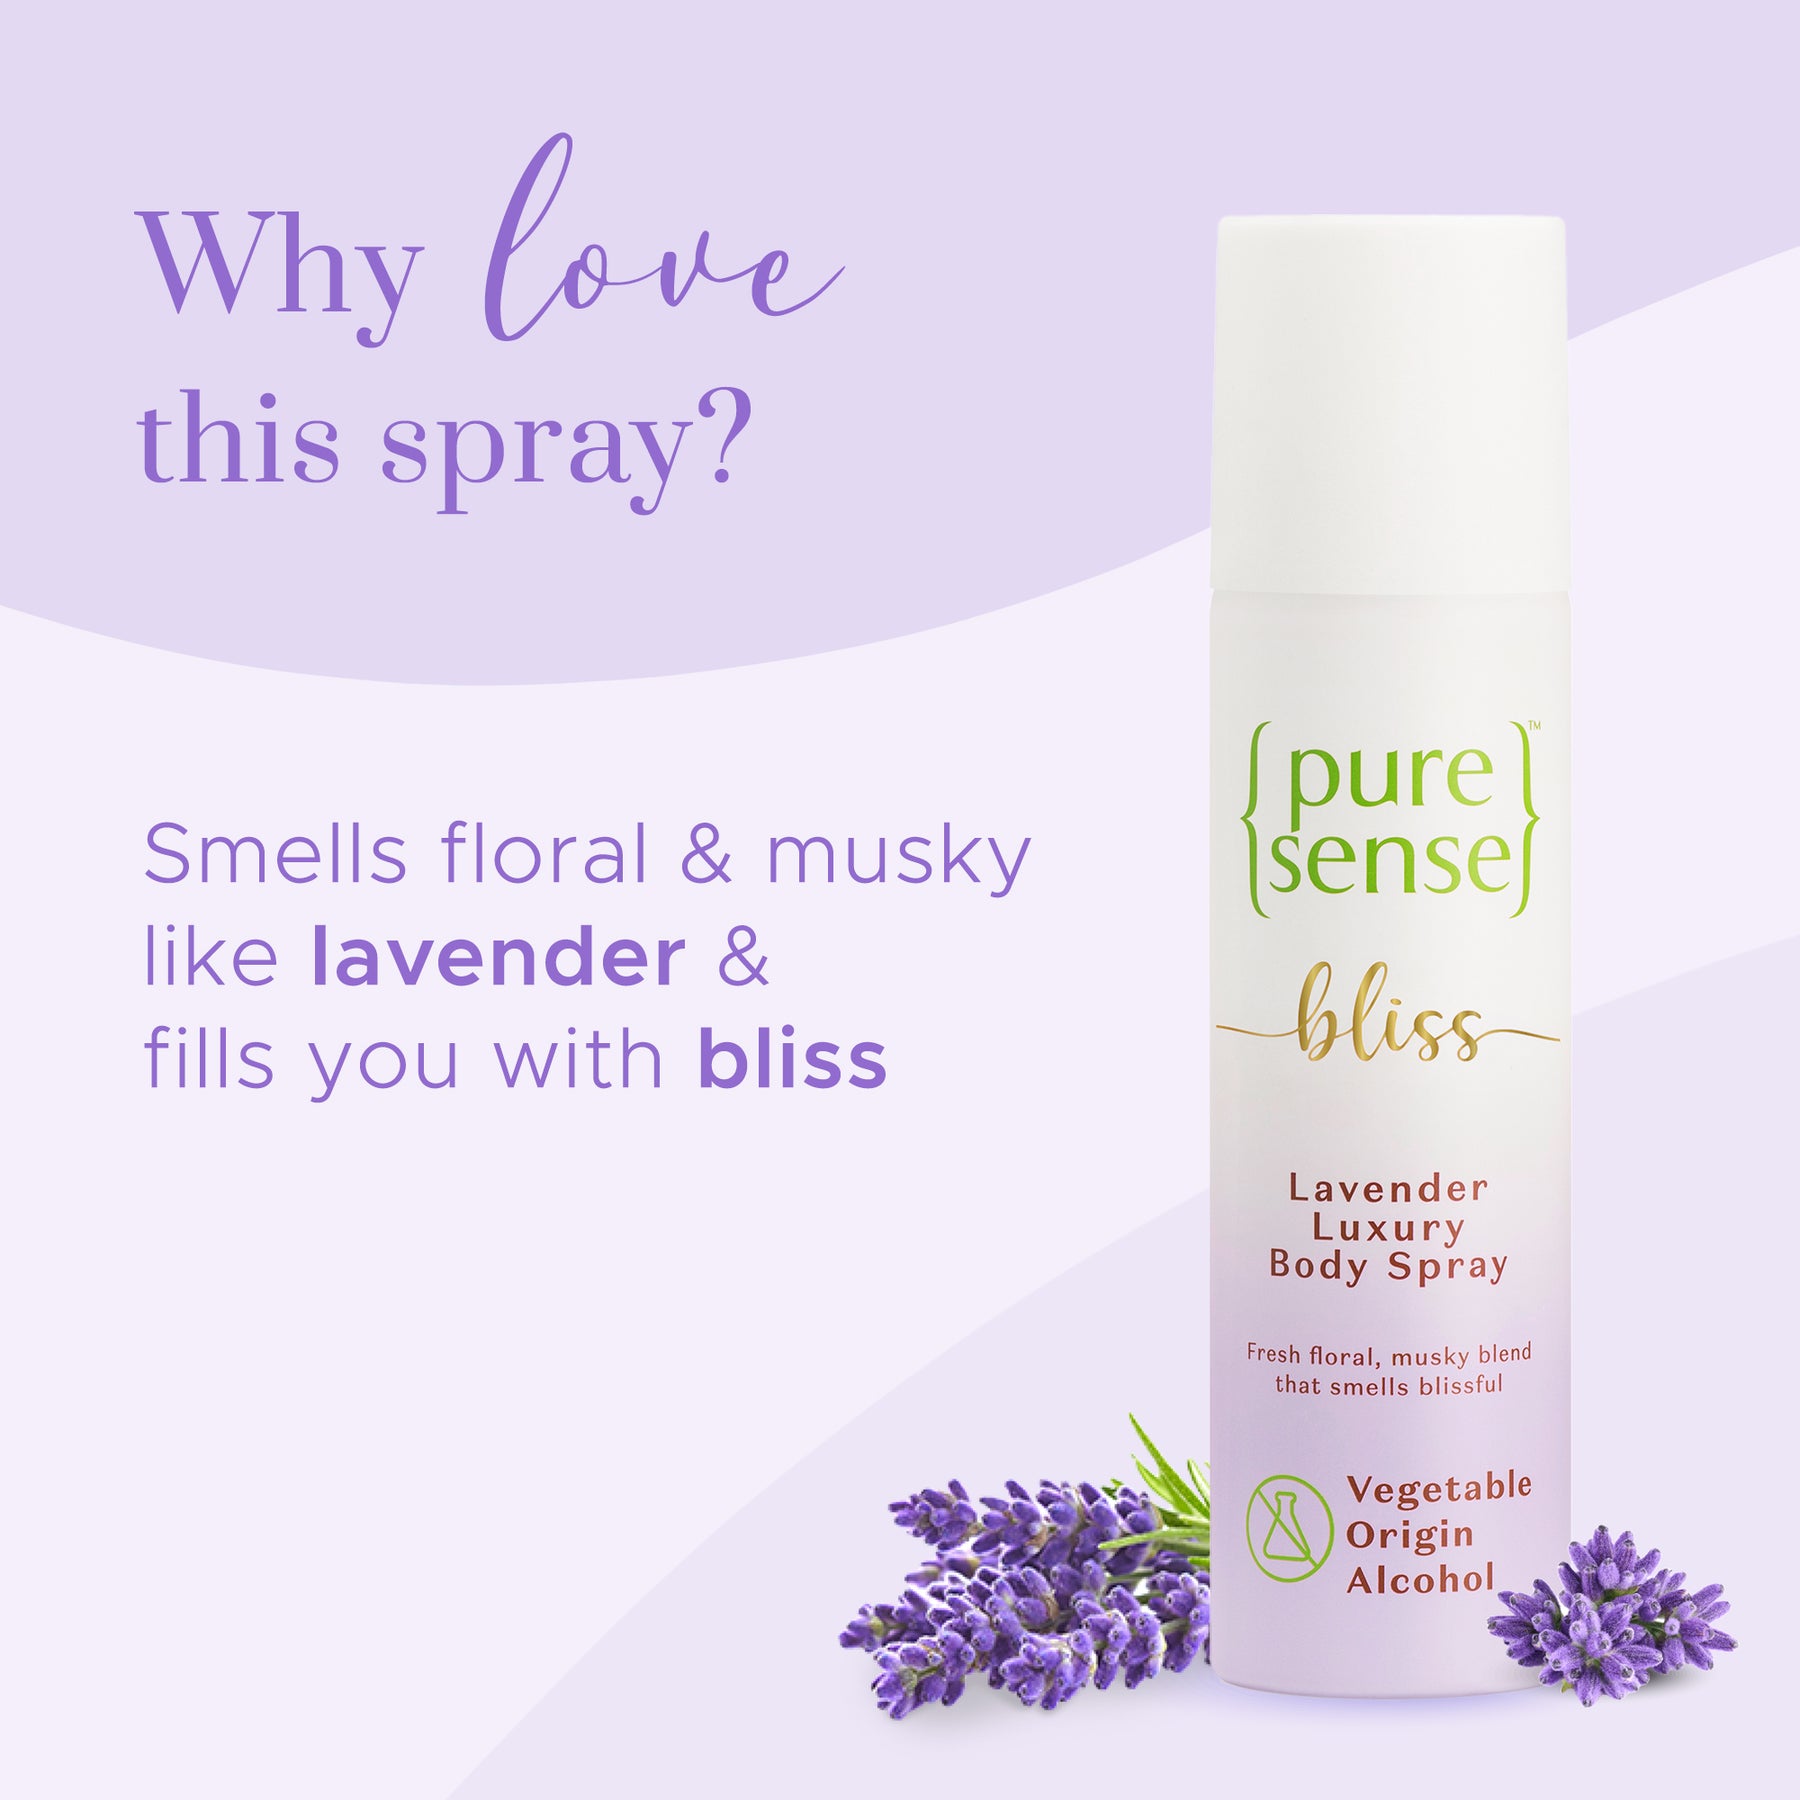 Bliss Lavender Luxury Body Spray | From the makers of Parachute Advansed | 150ml - PureSense